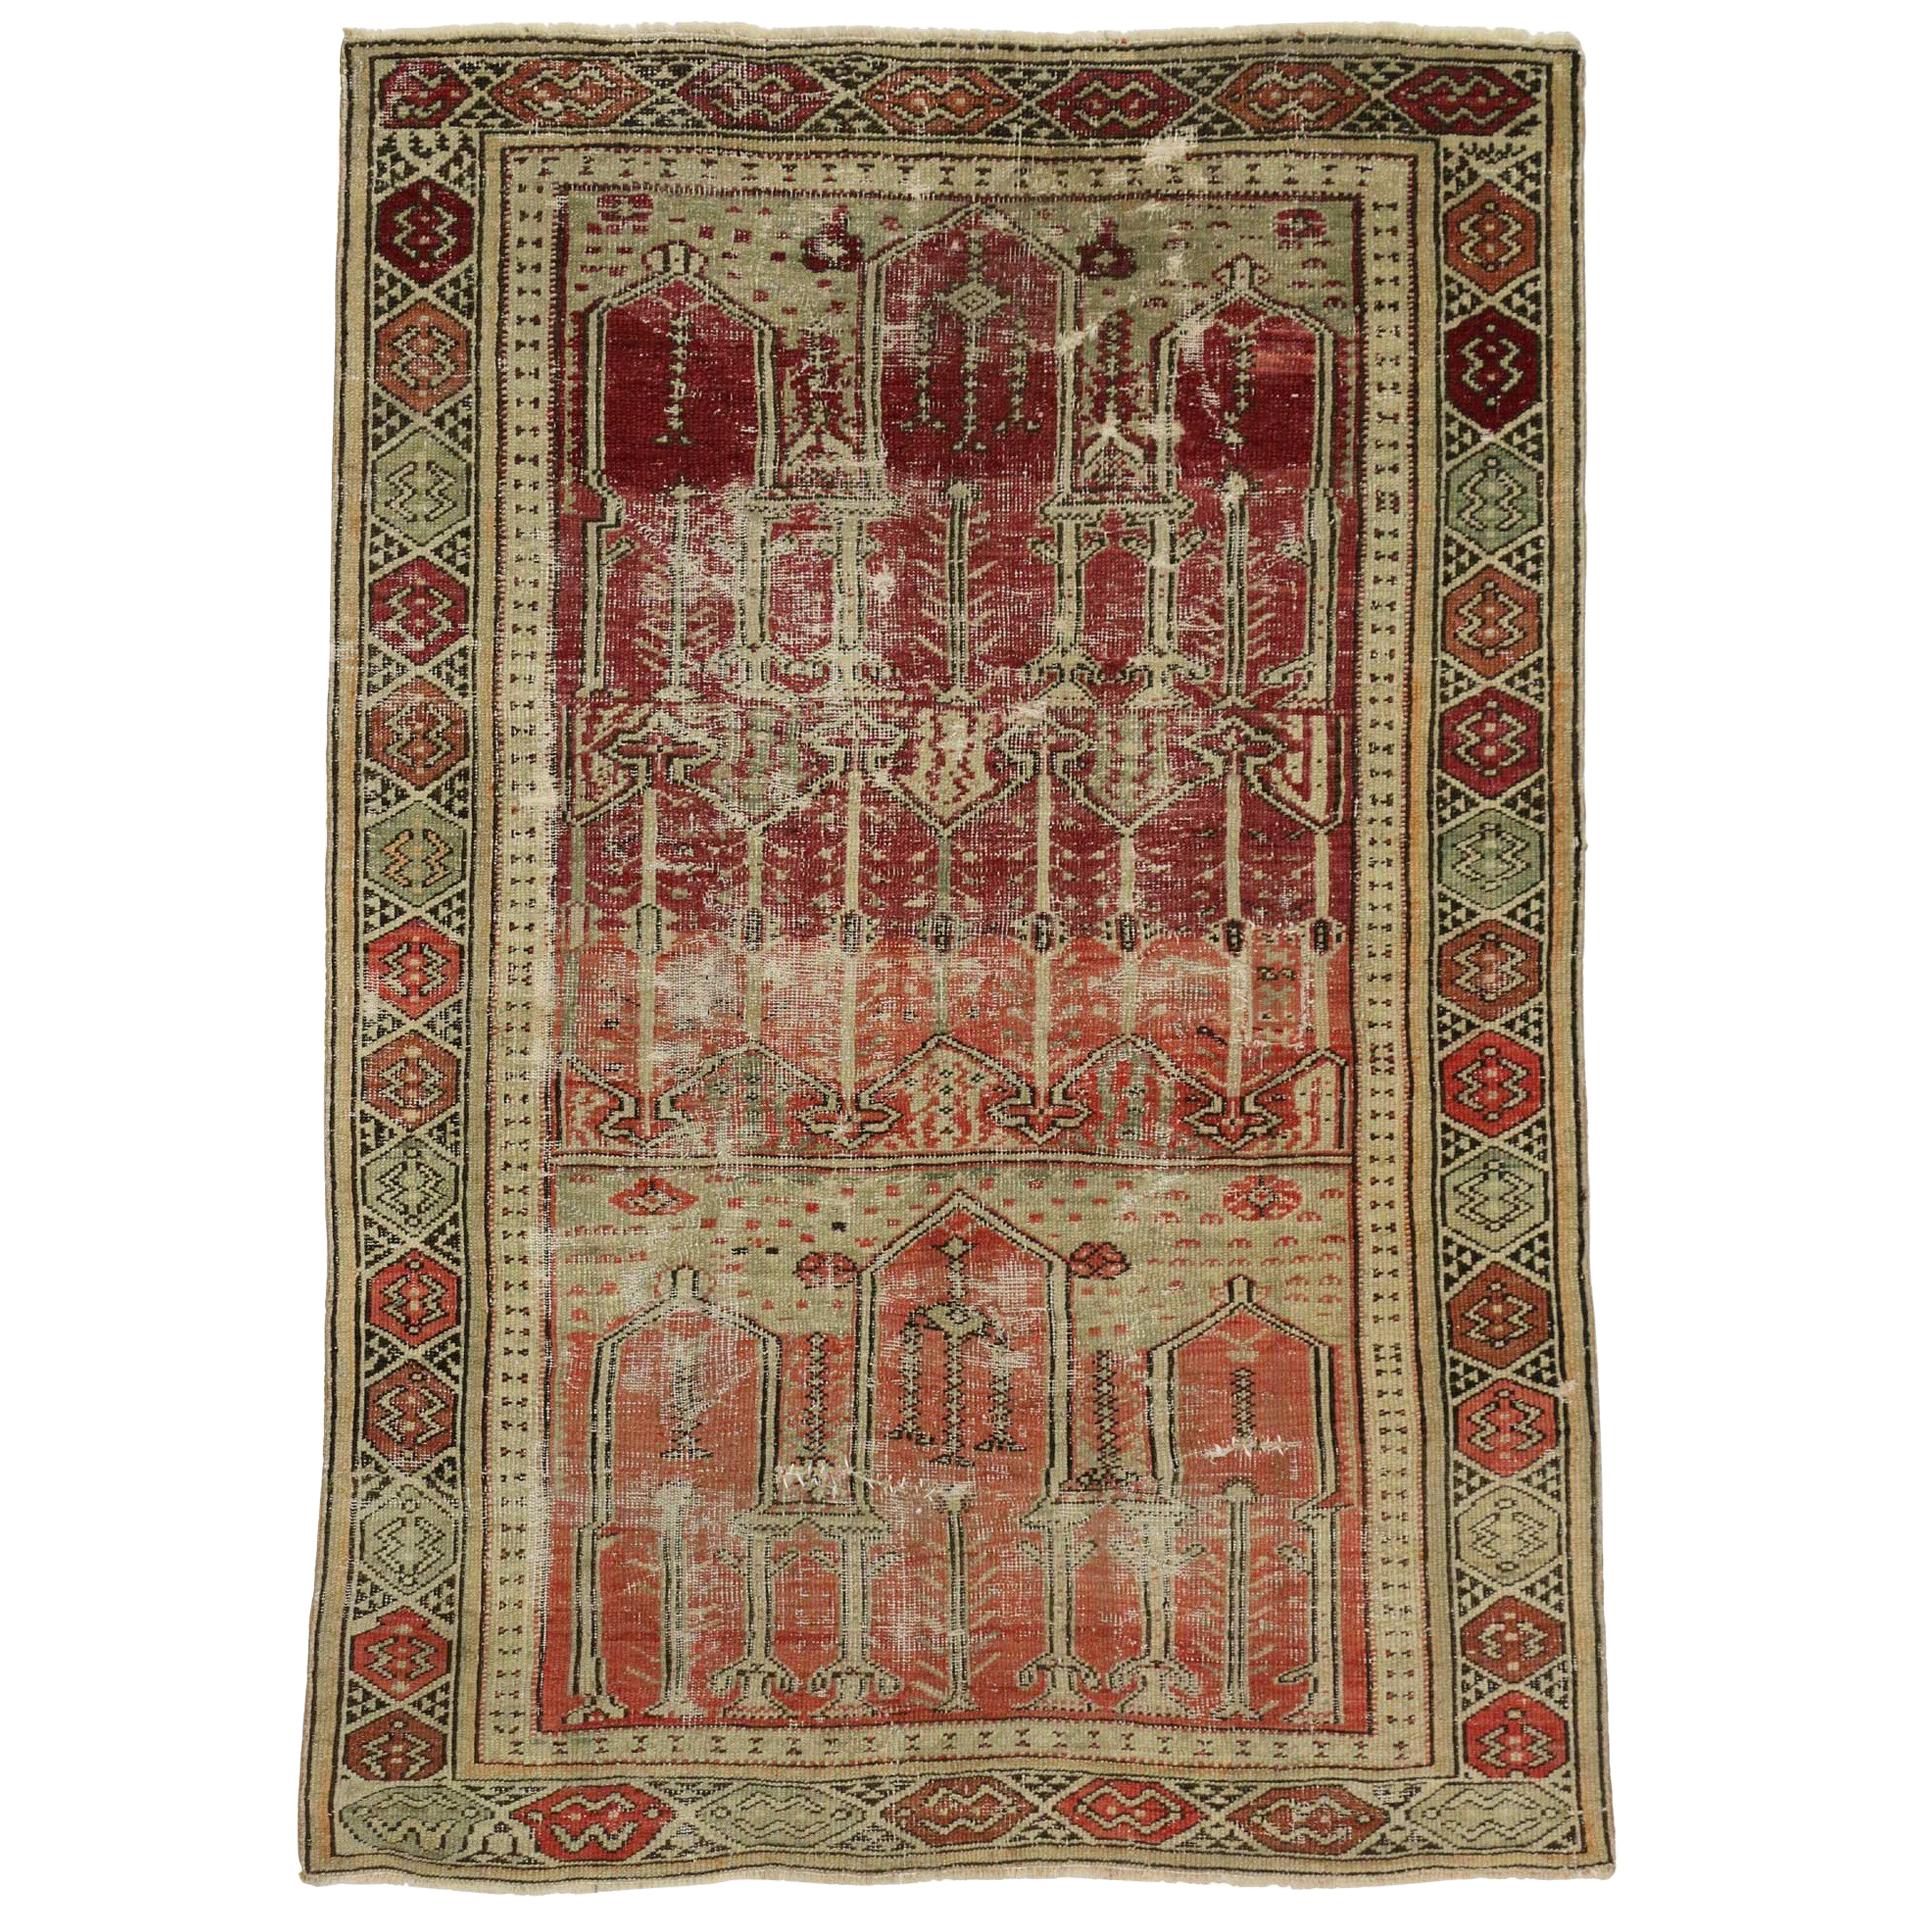 Distressed Vintage Turkish Oushak Rug with Rustic Style